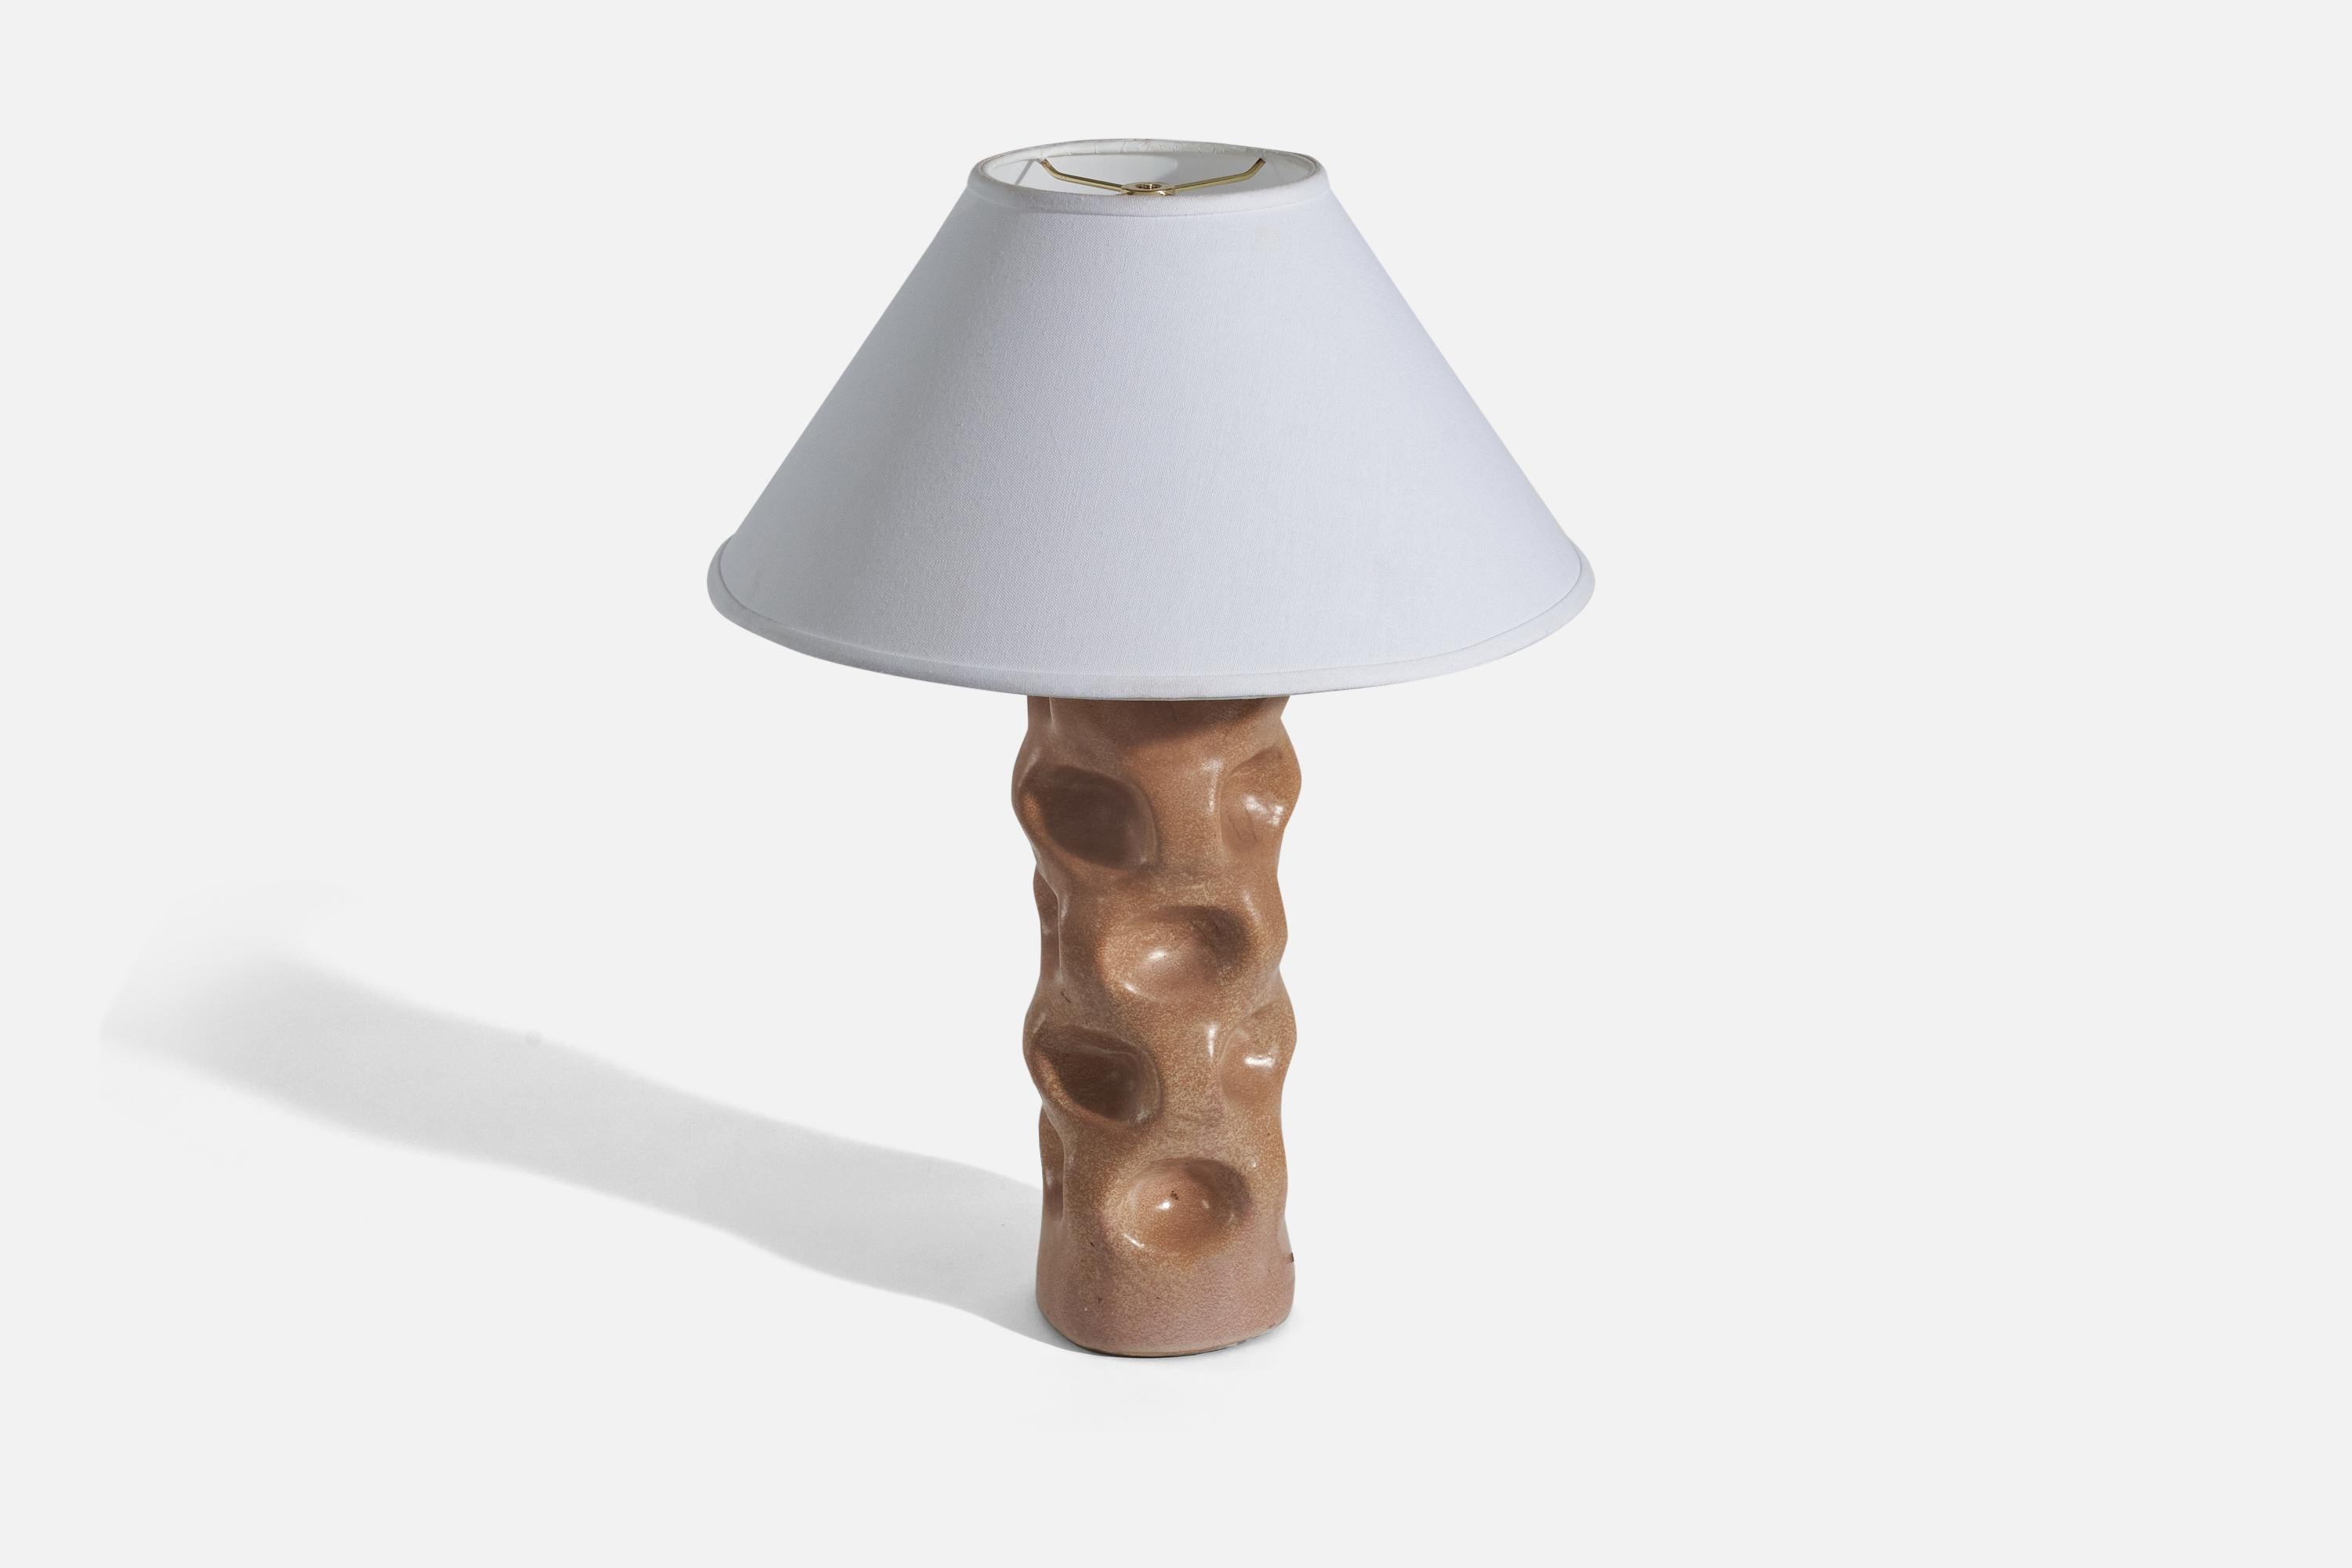 A light brown ceramic table lamp designed and produced by an American designer, USA, 1960s.

Sold without lampshade. 
Dimensions of Lamp (inches) : 18.56 x 5.5 x 5.5 (Height x Width x Depth)
Dimensions of Shade (inches) : 6.25 x 16.37 x 9.12 (Top